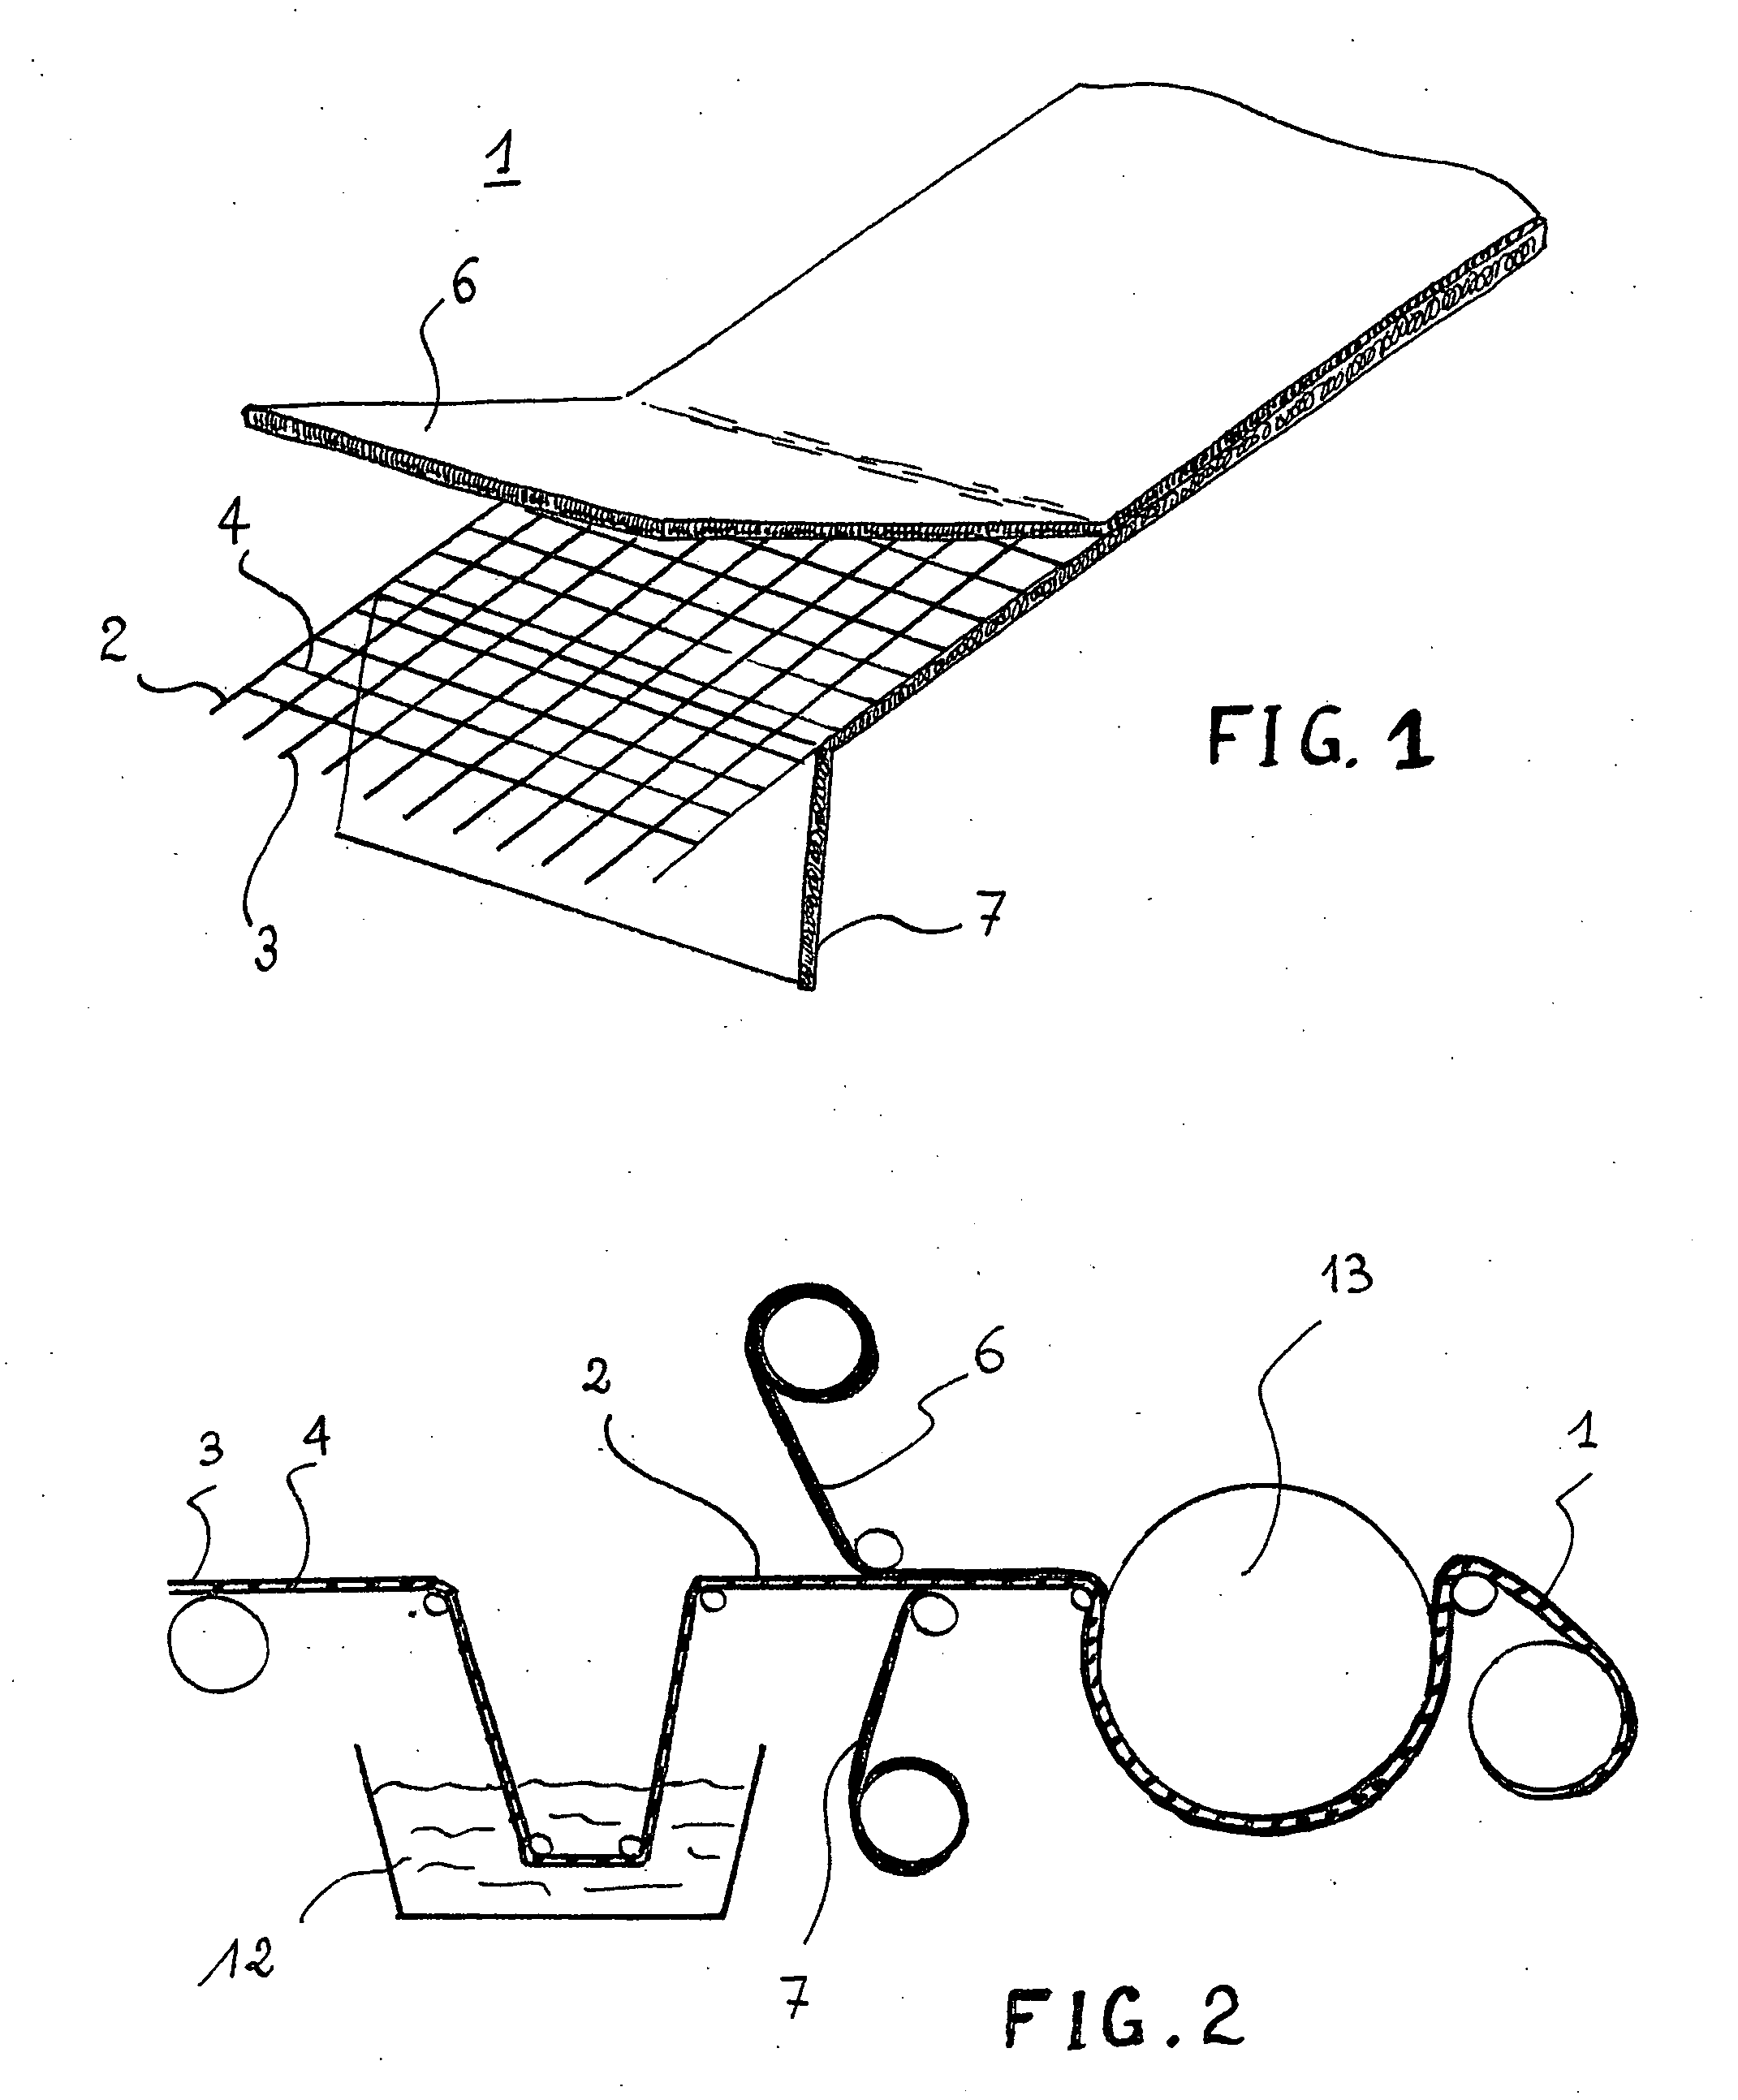 Textile composite intended for mechanical reinforcement of a bitumen-based waterproof coating